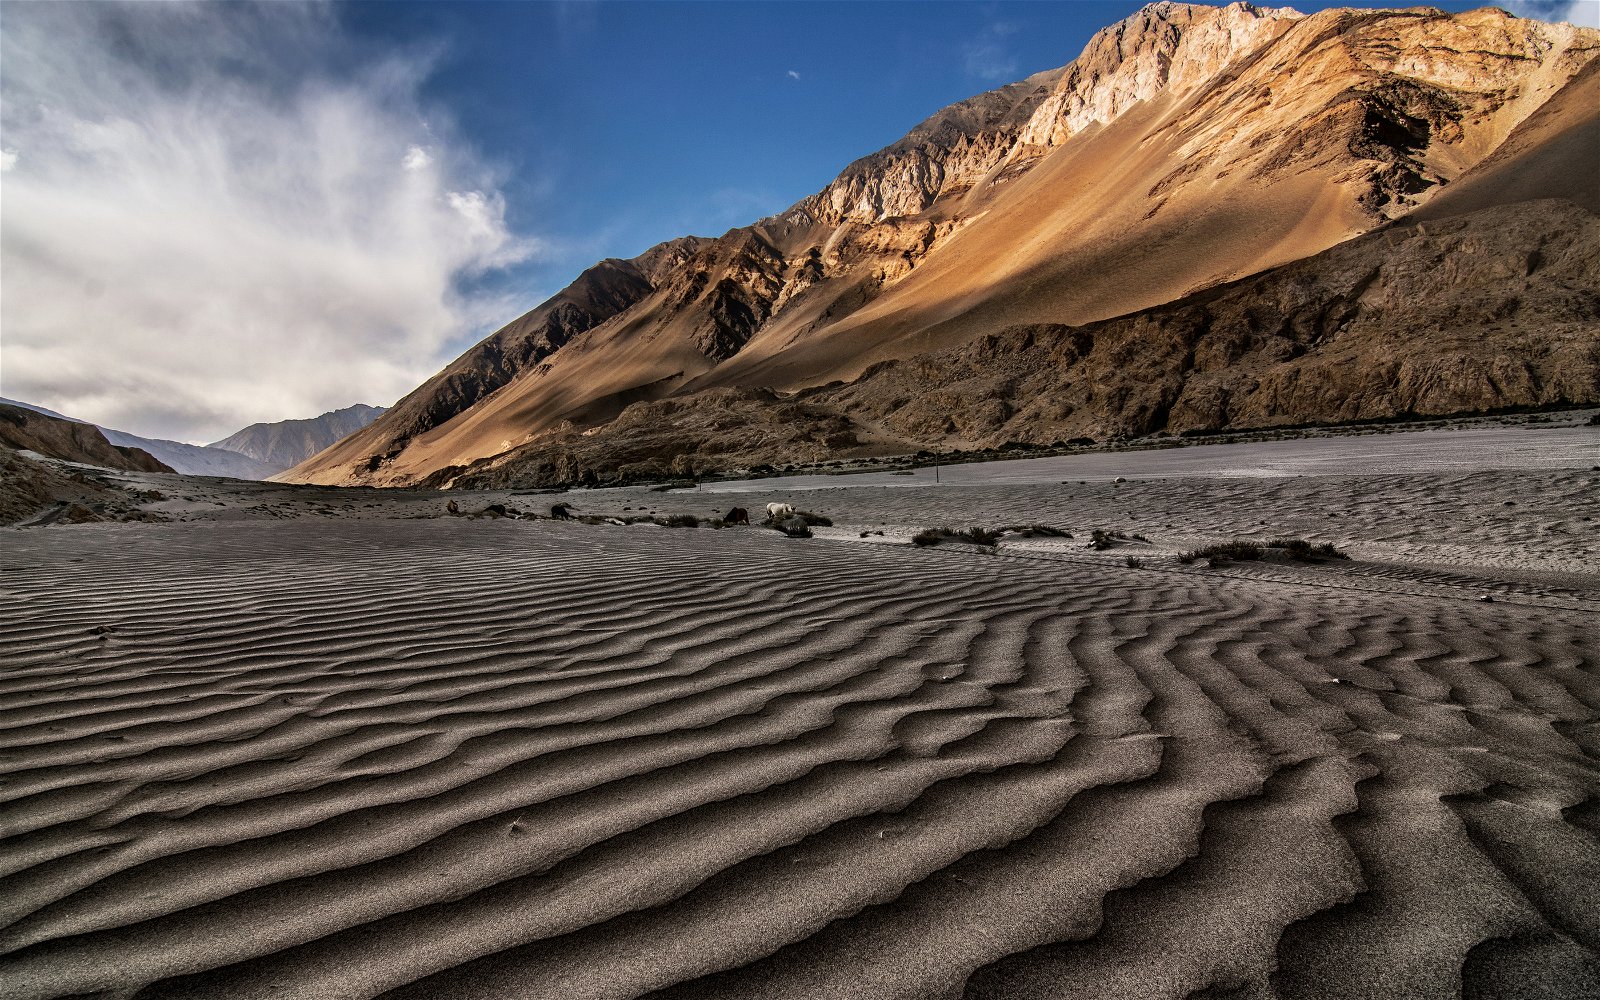 Ladakh News: Ladakh to give Nubra Valley an upgrade and develop